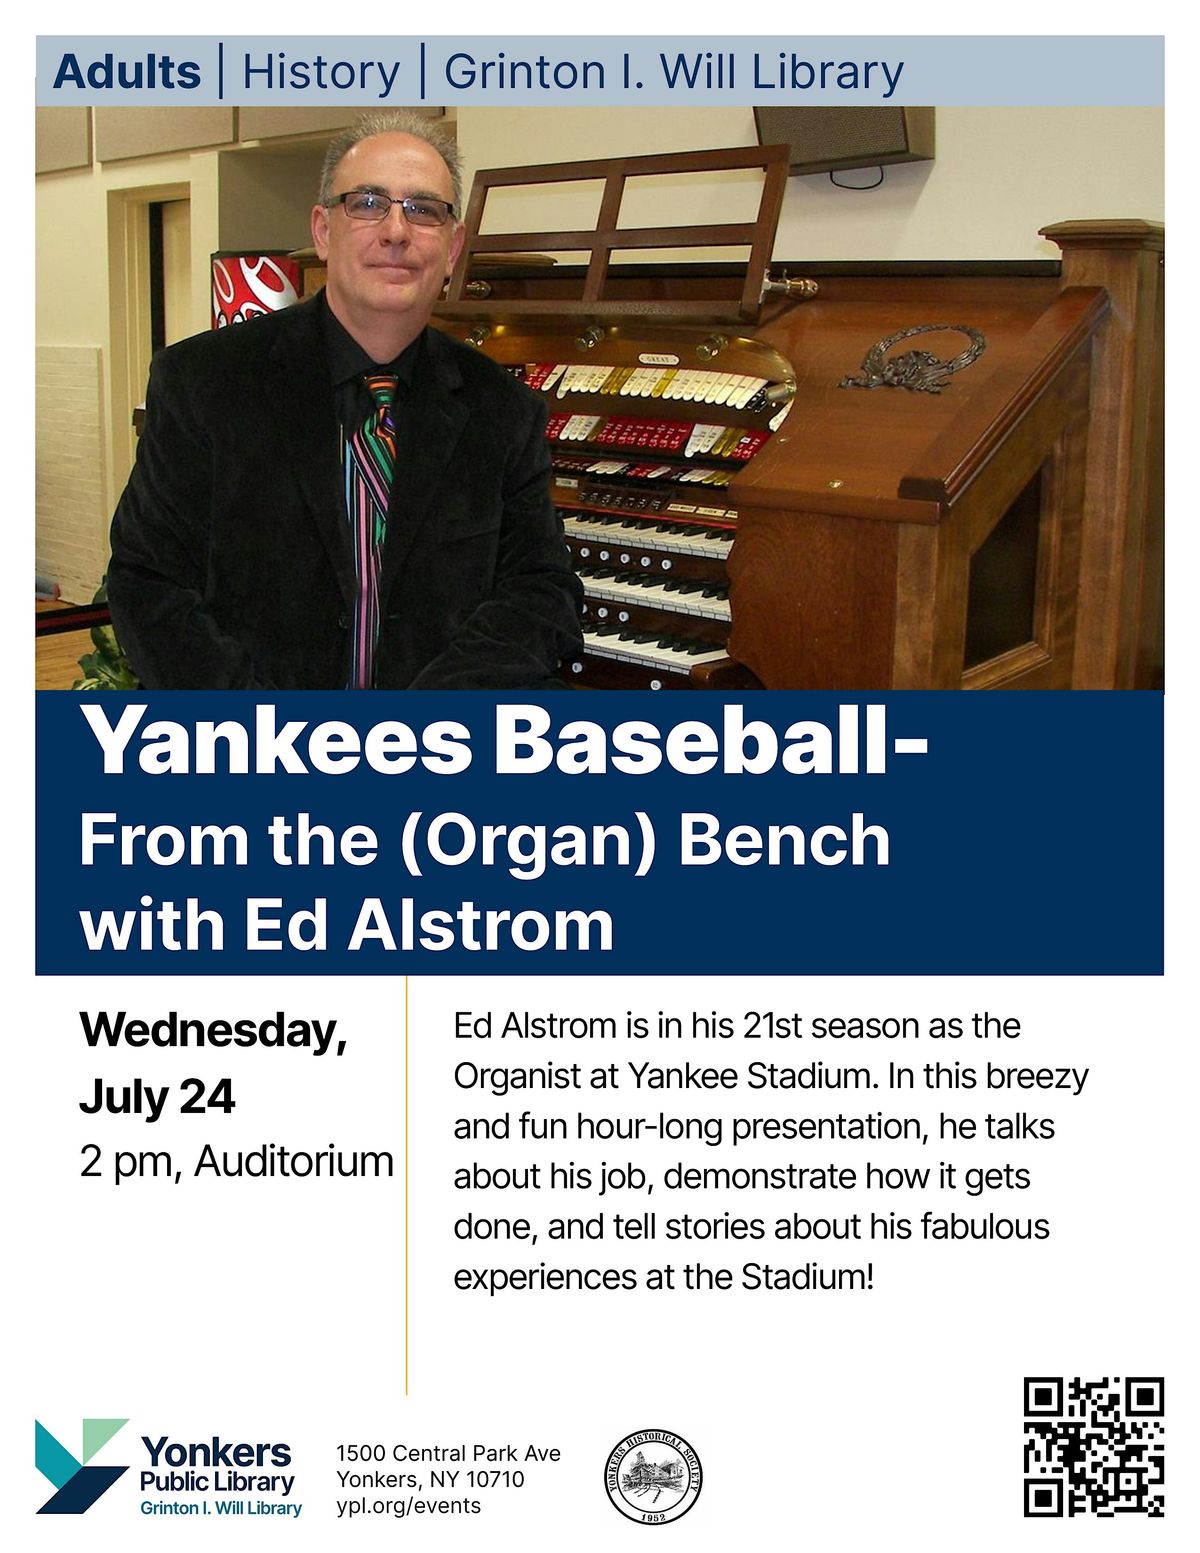 Yankees Baseball-From the (Organ) Bench with Ed Alstrom